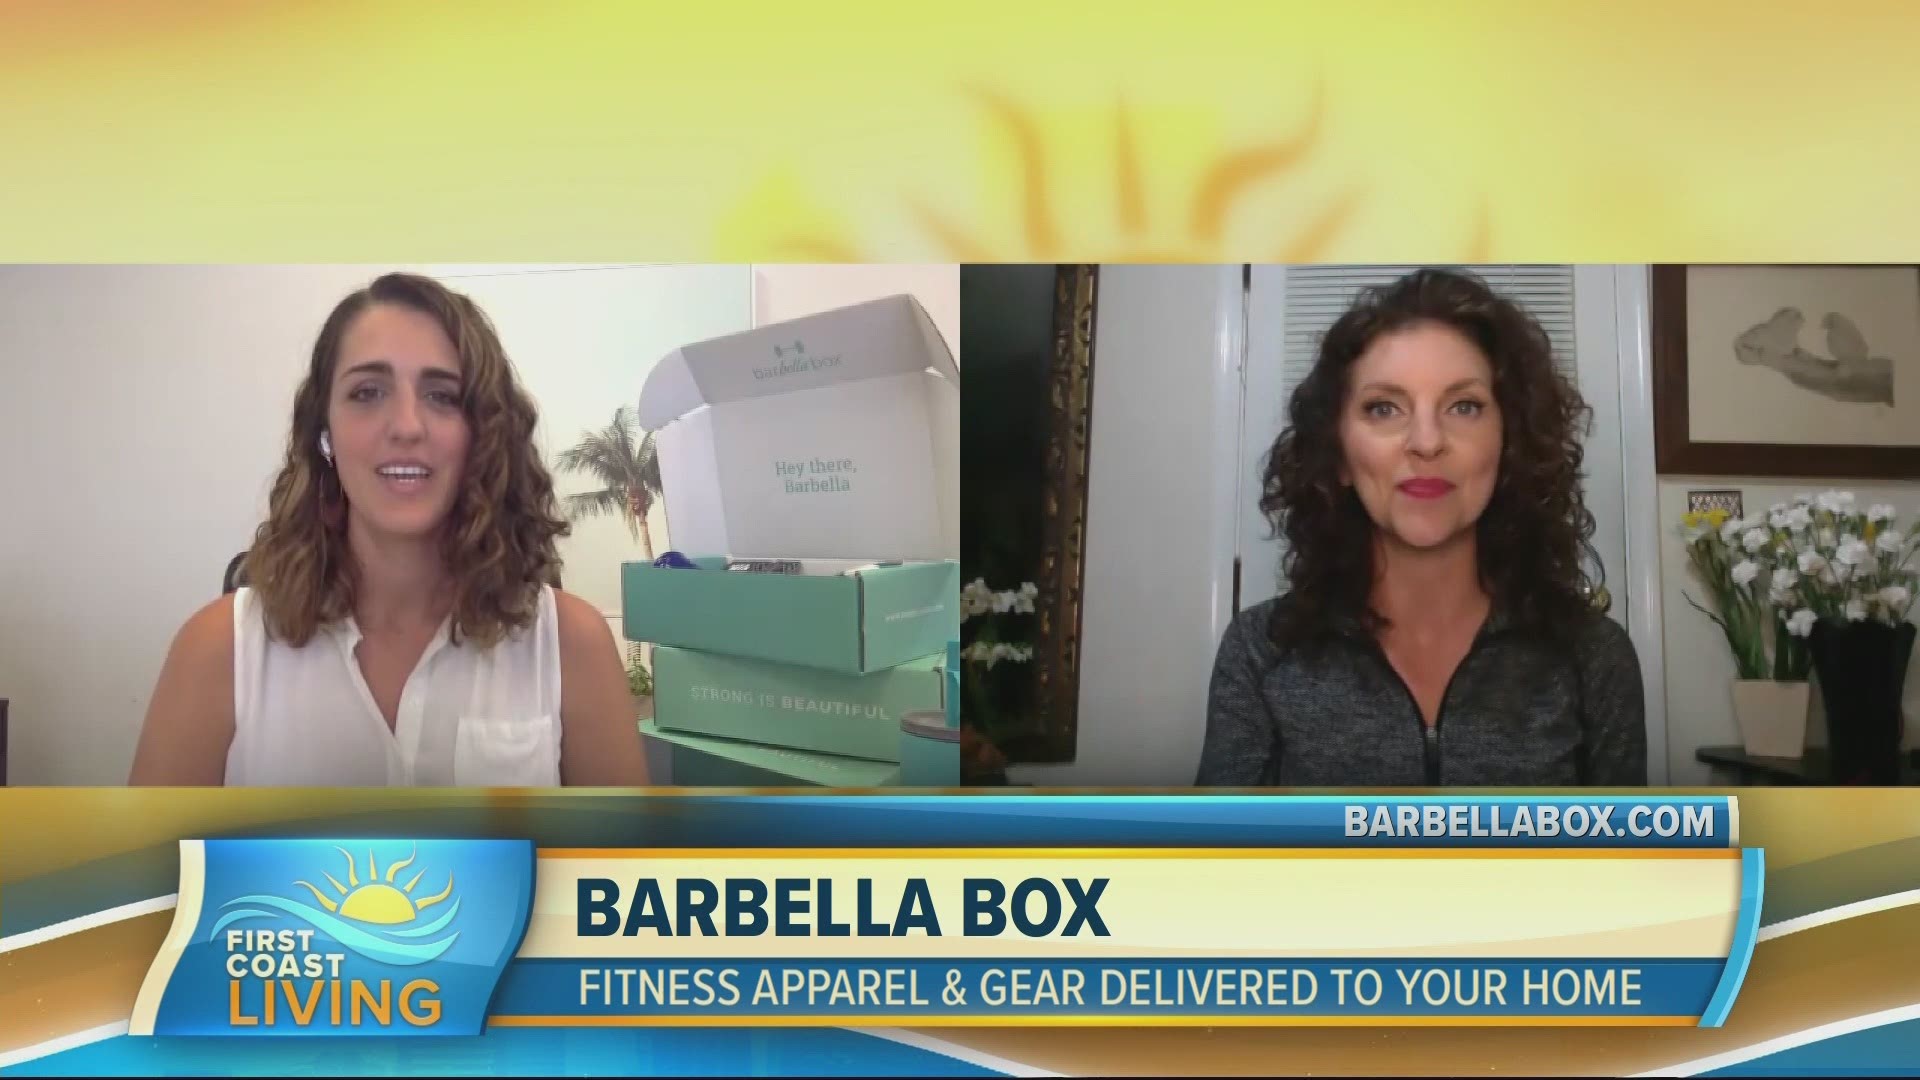 Learn how the Barbella Box can up your fitness game.